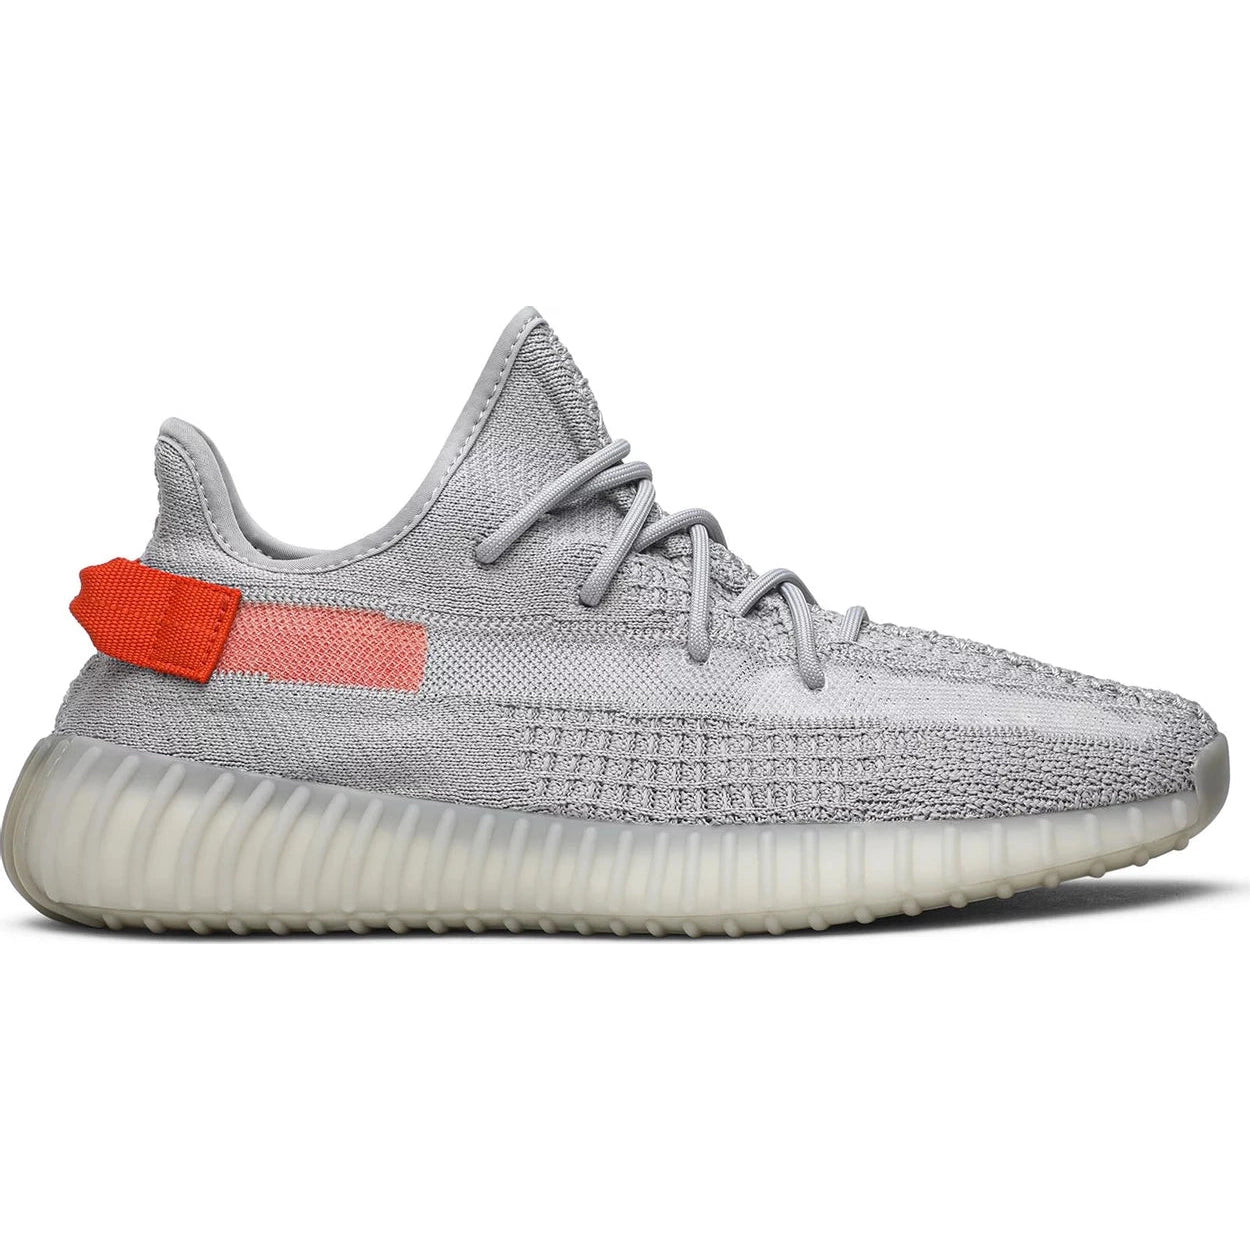 Adidas Yeezy Boost 350 V2 'Tail Light' | Waves Never Die | Yeezy | Sneakers